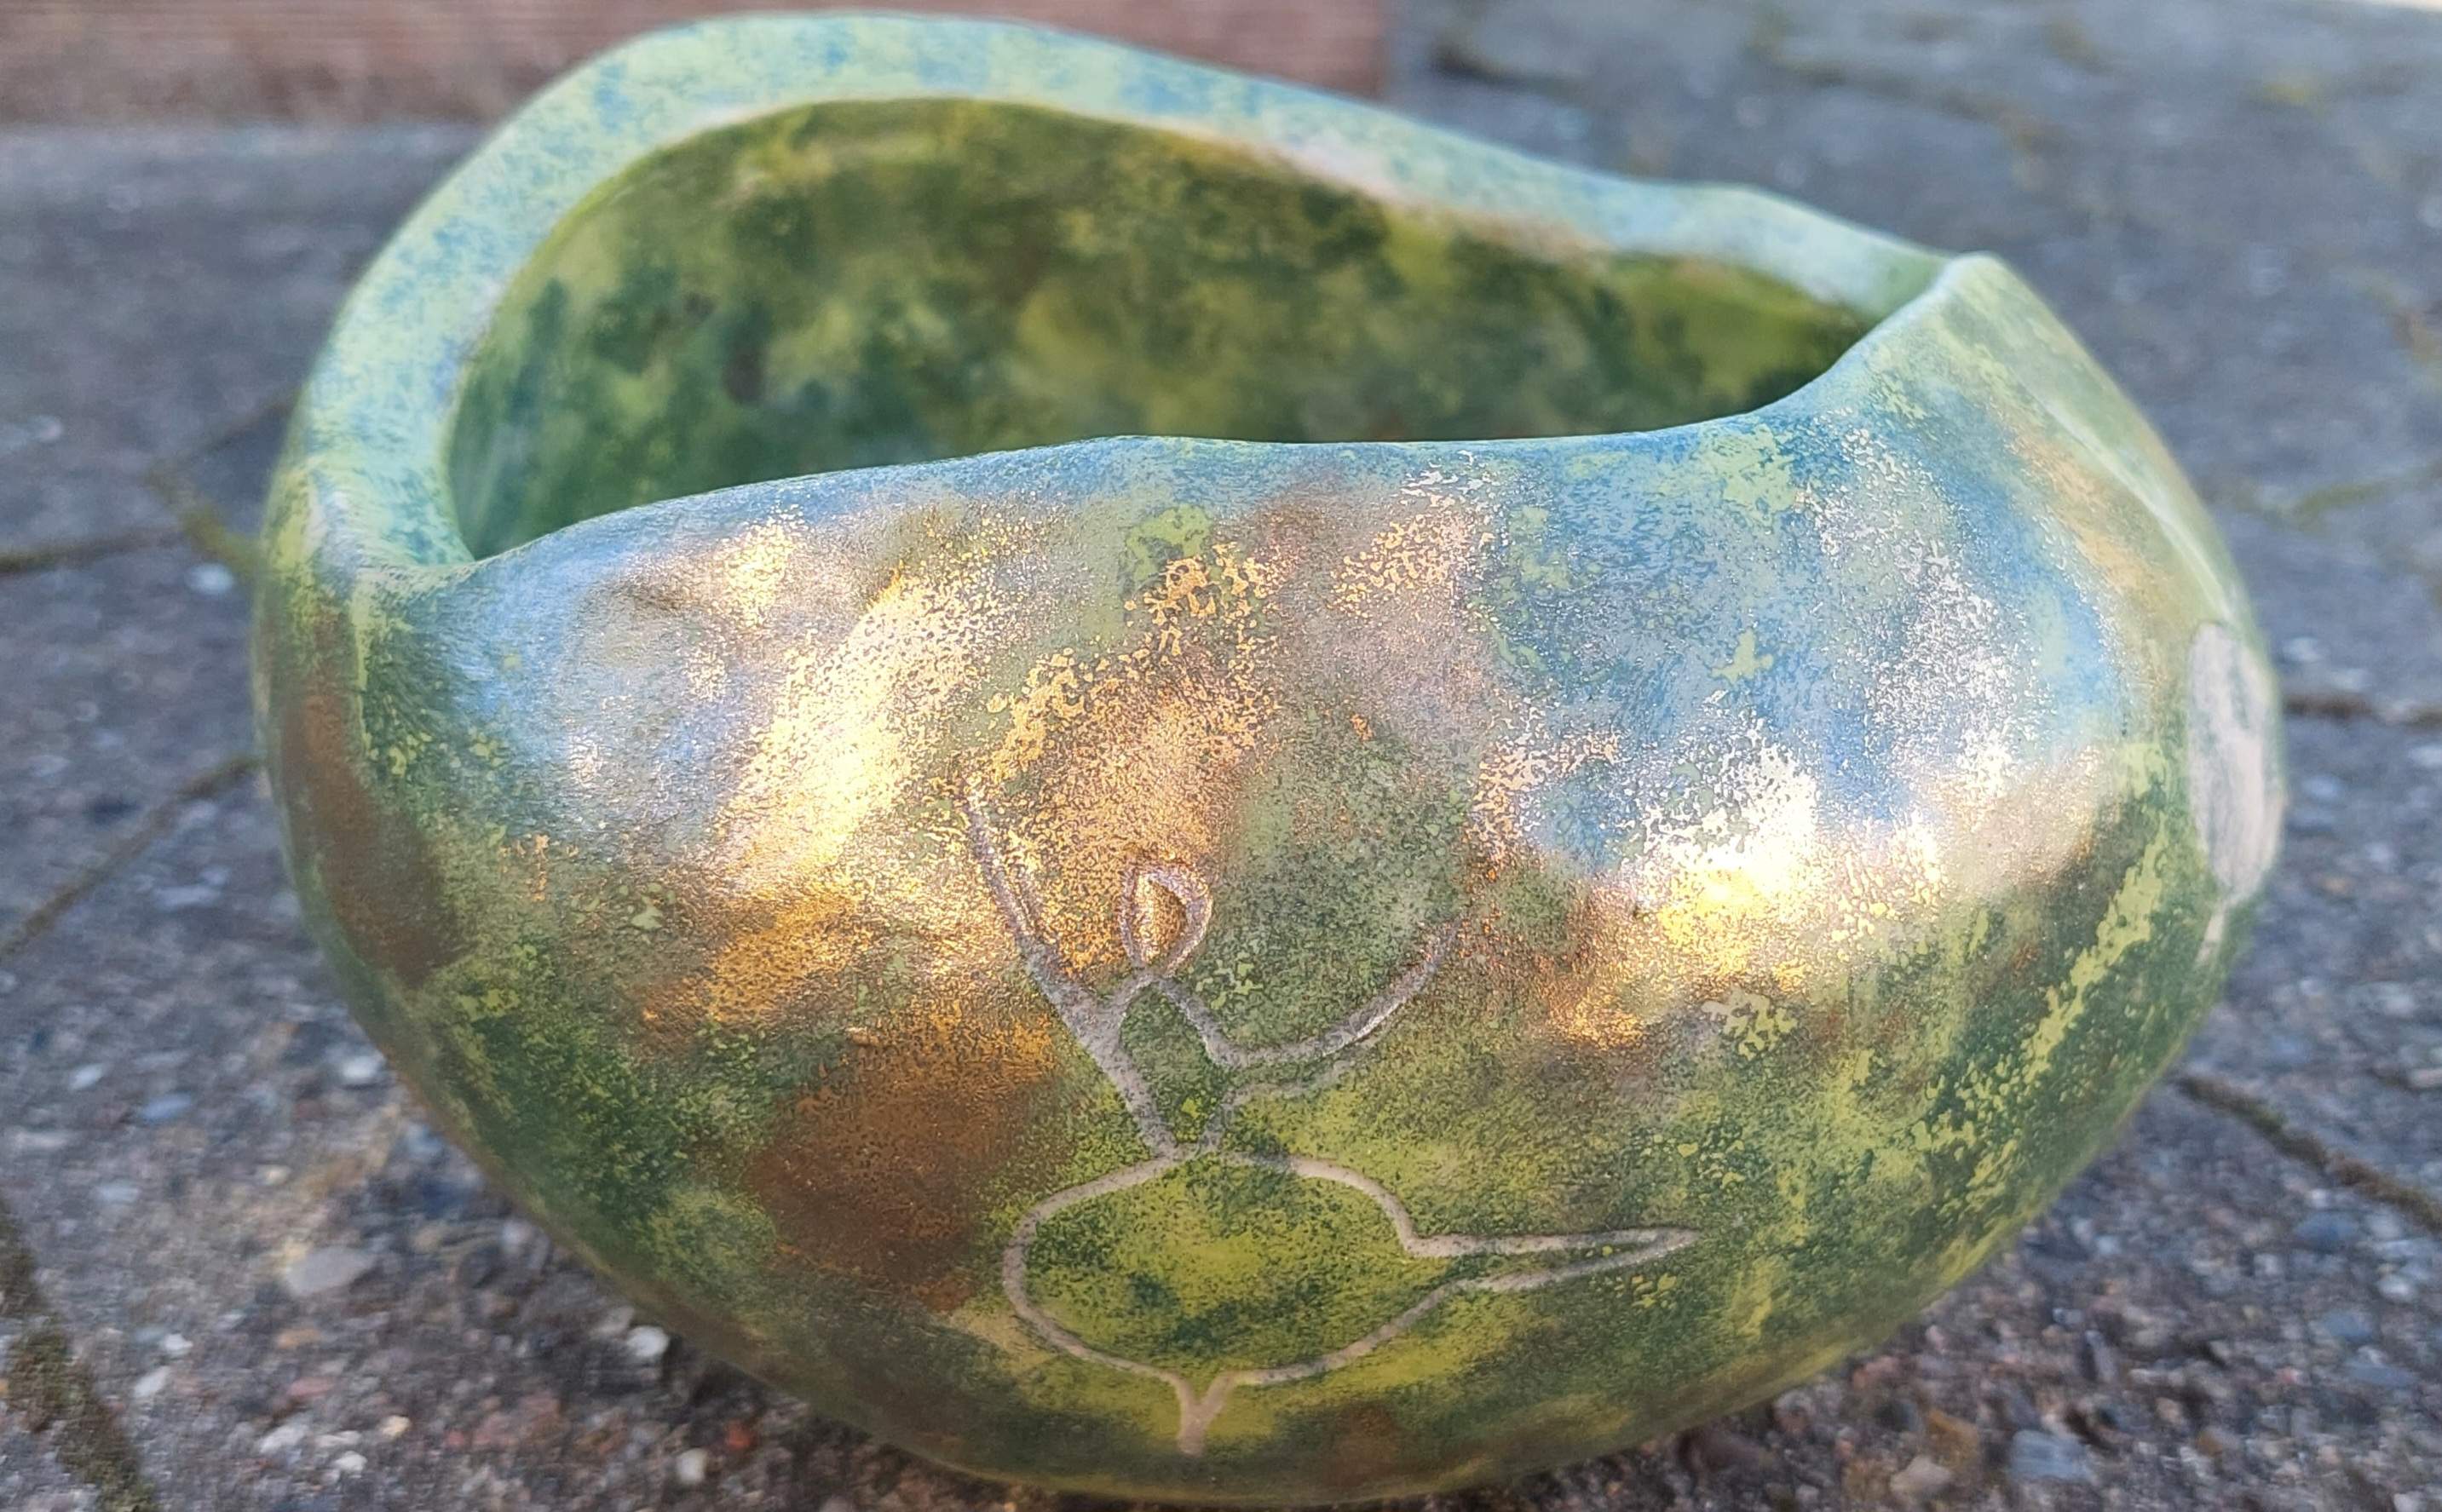 Stoneware with luster and gold. Glass inside